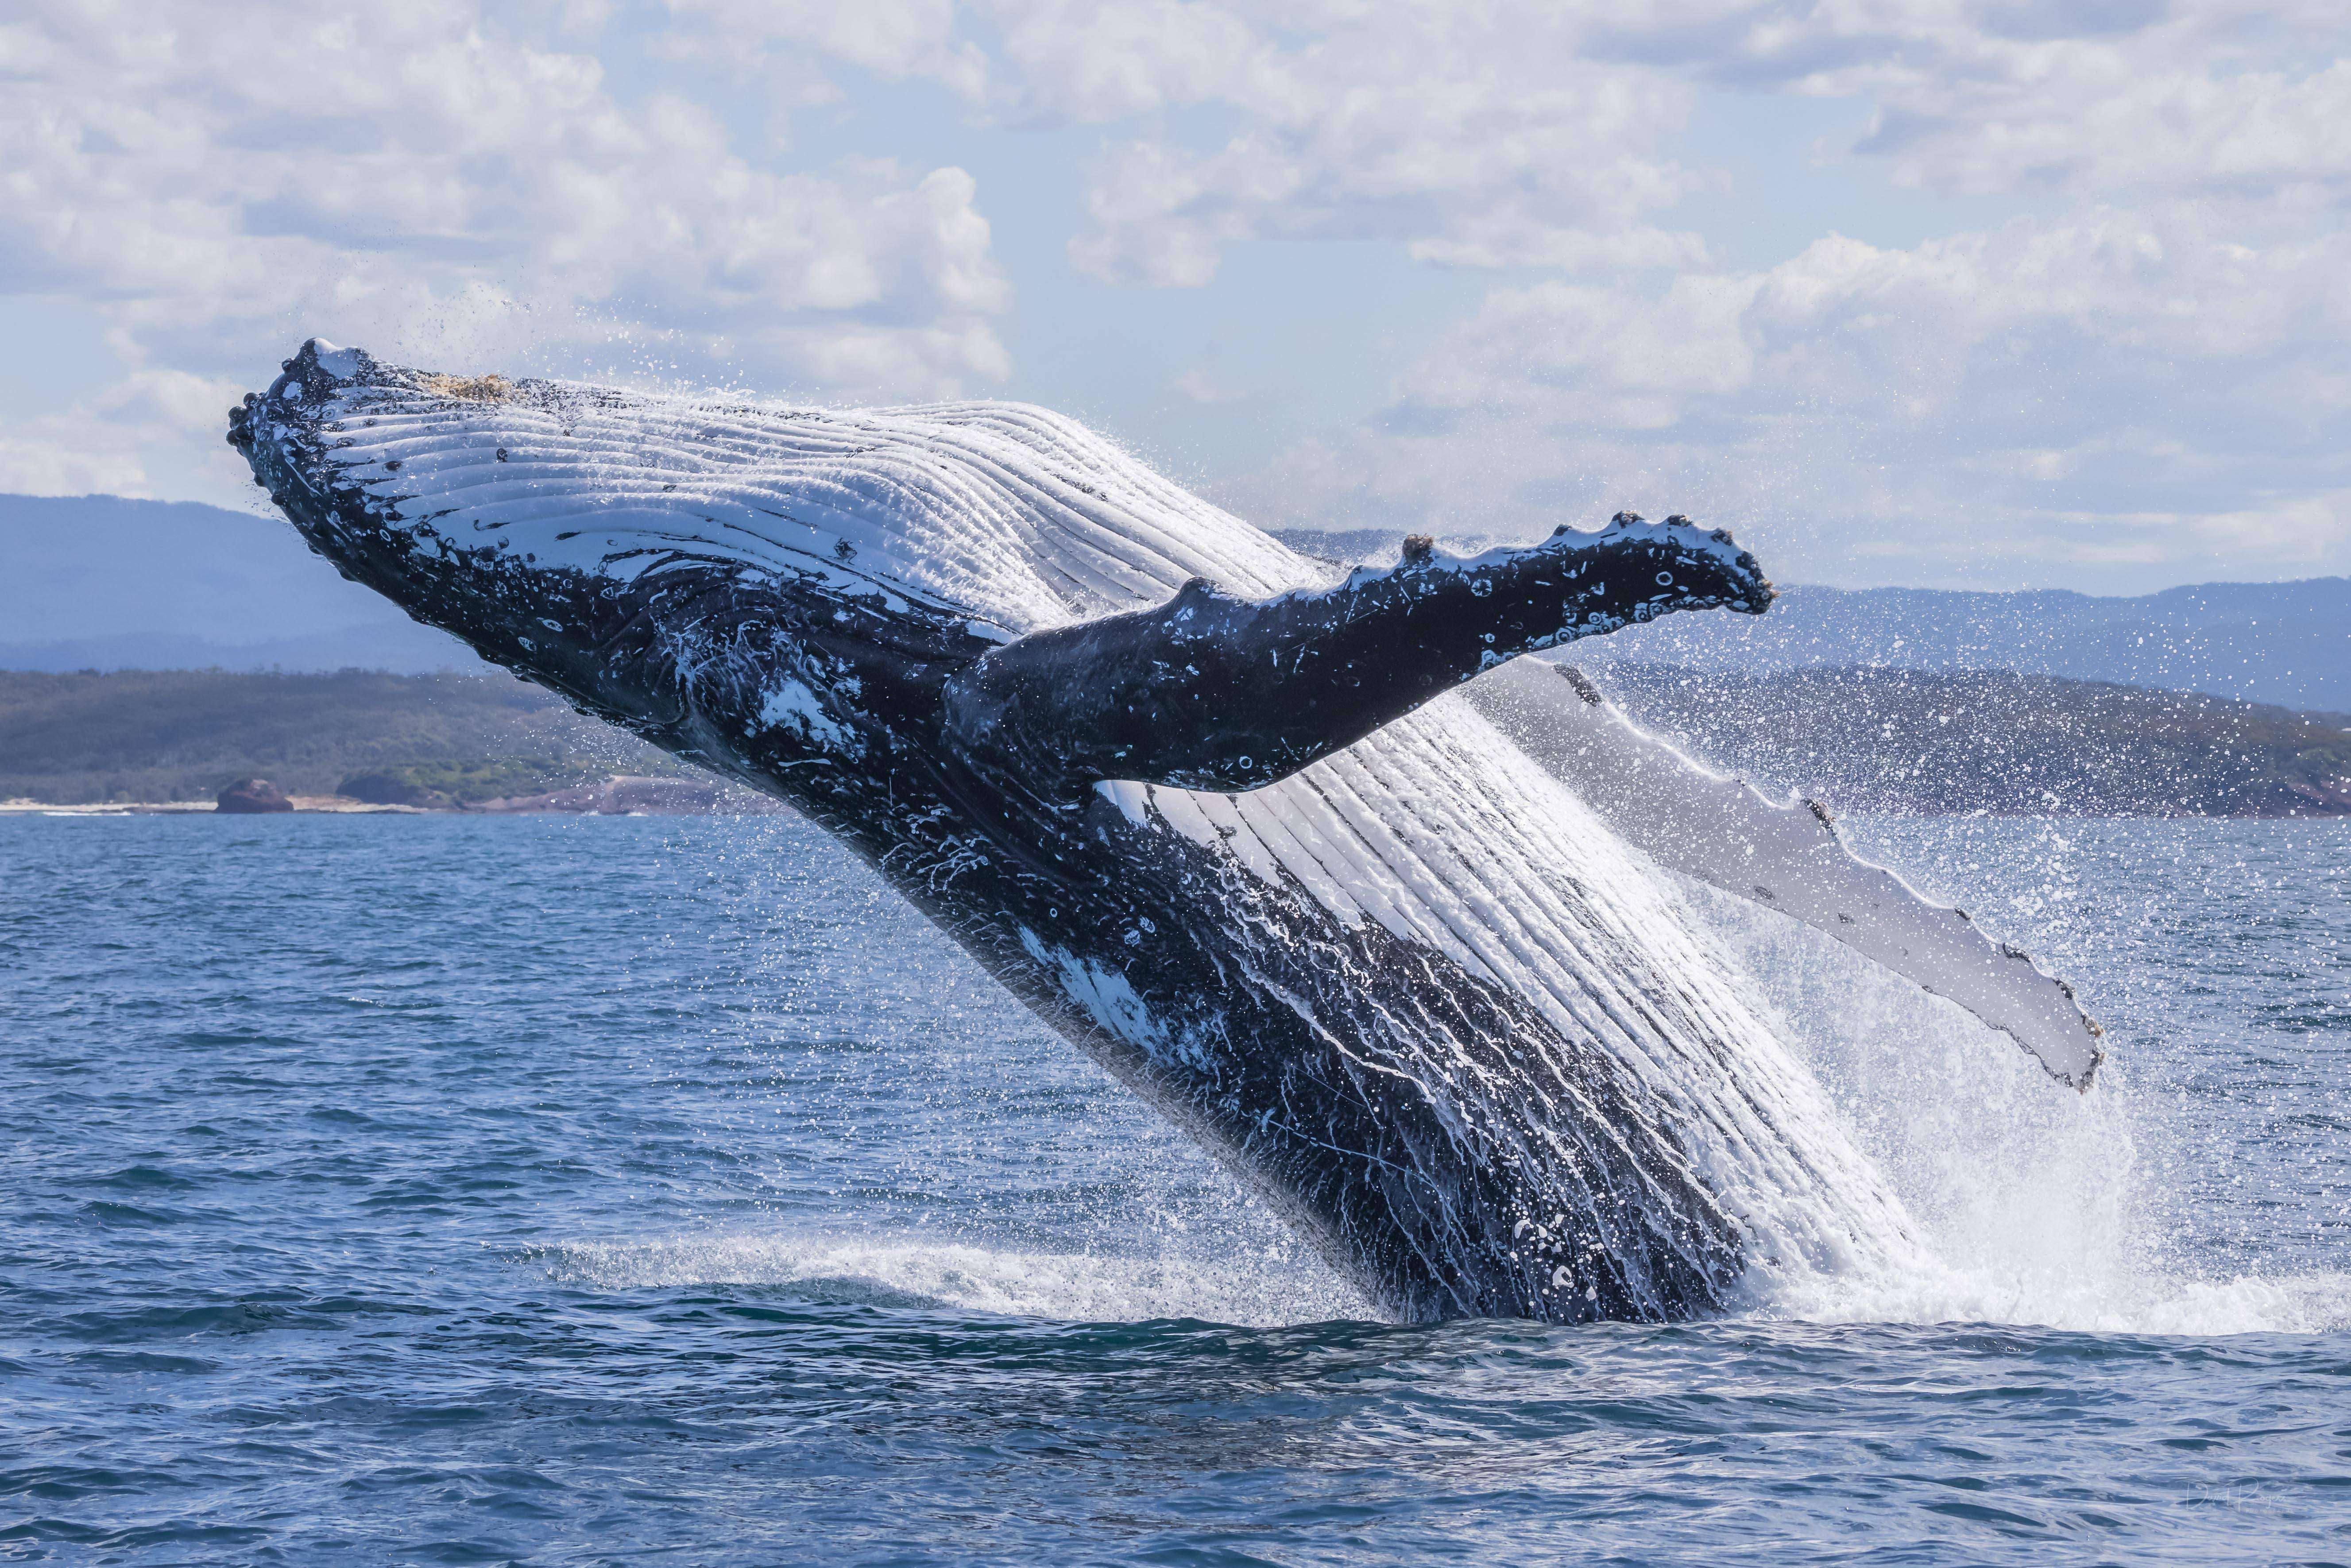 New Whale Trail campaign kicks off in Bermagui